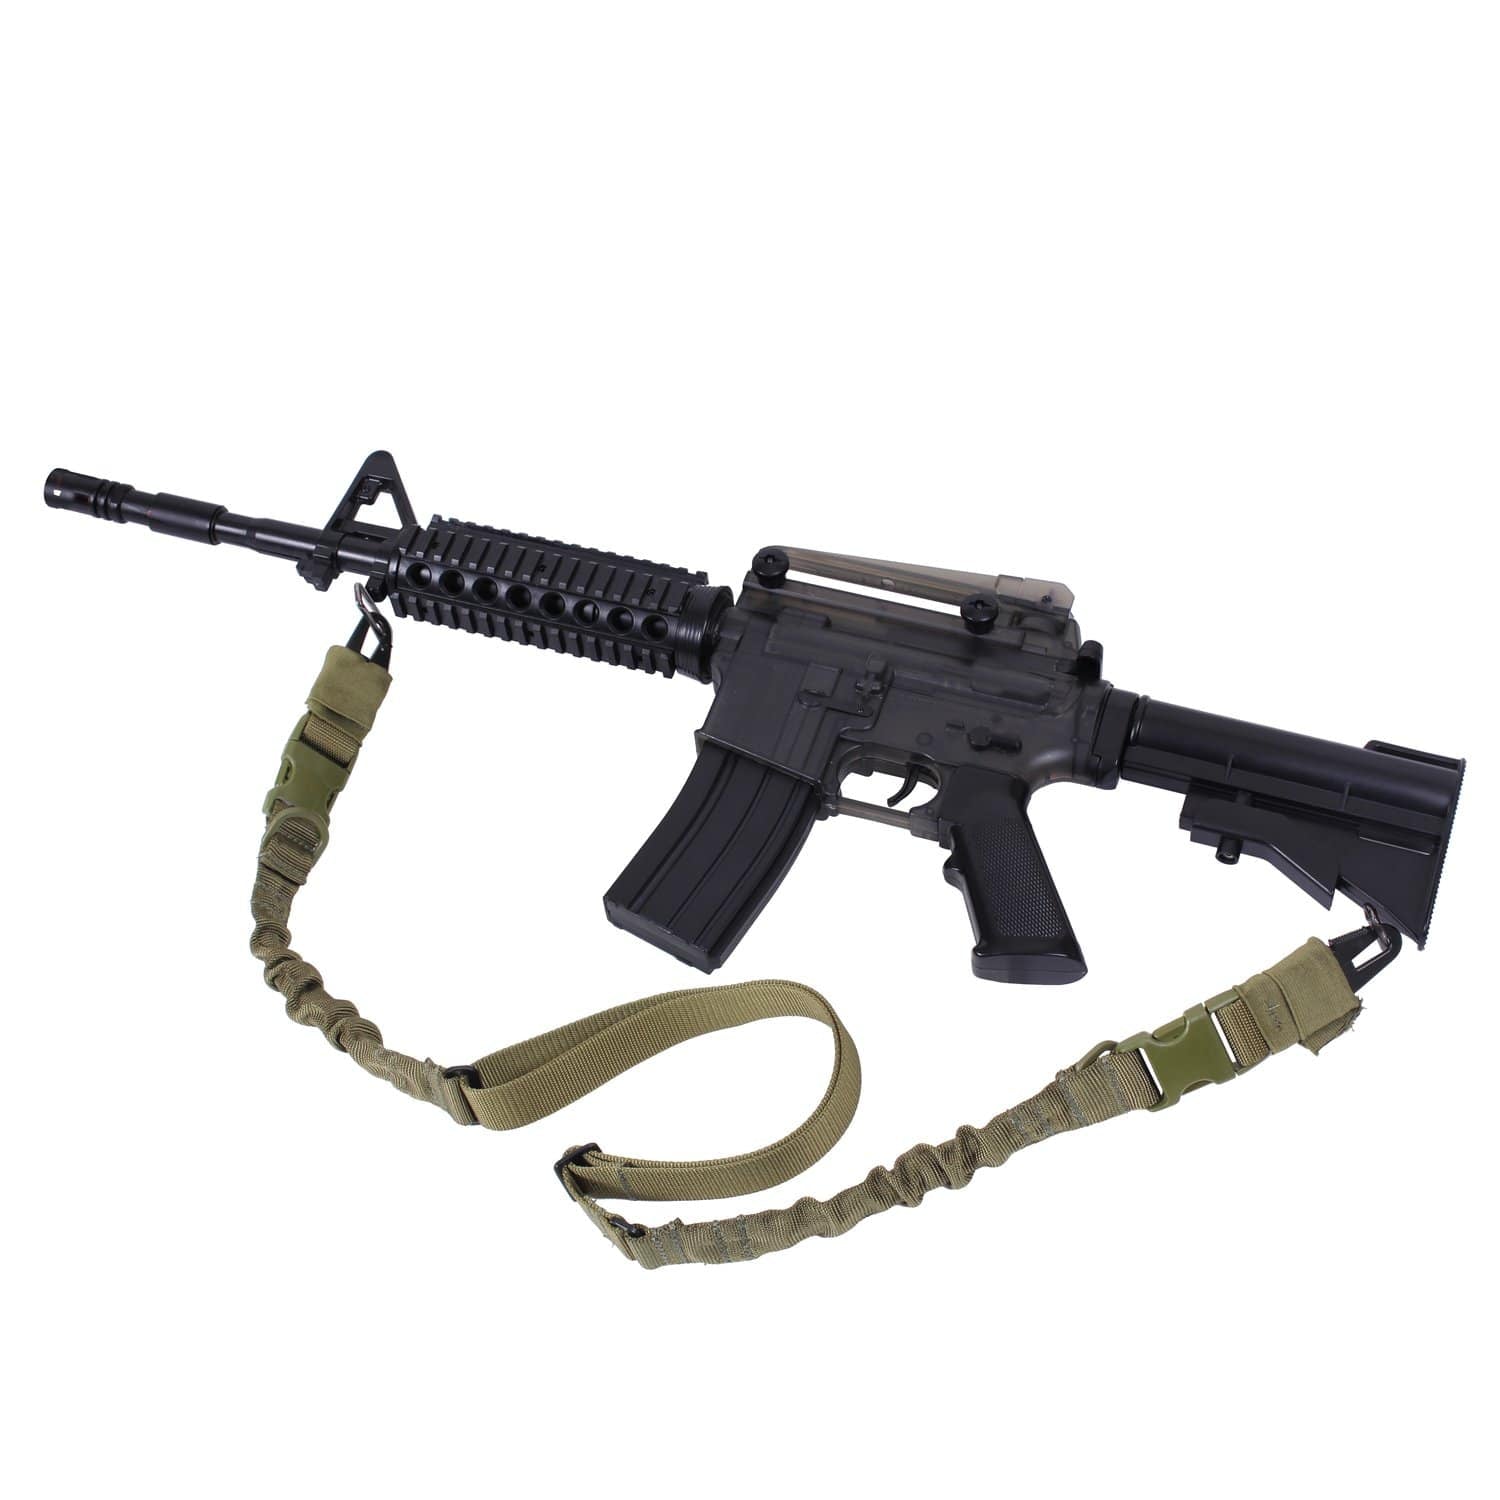 Rothco 2-Point Tactical Sling - Eminent Paintball And Airsoft